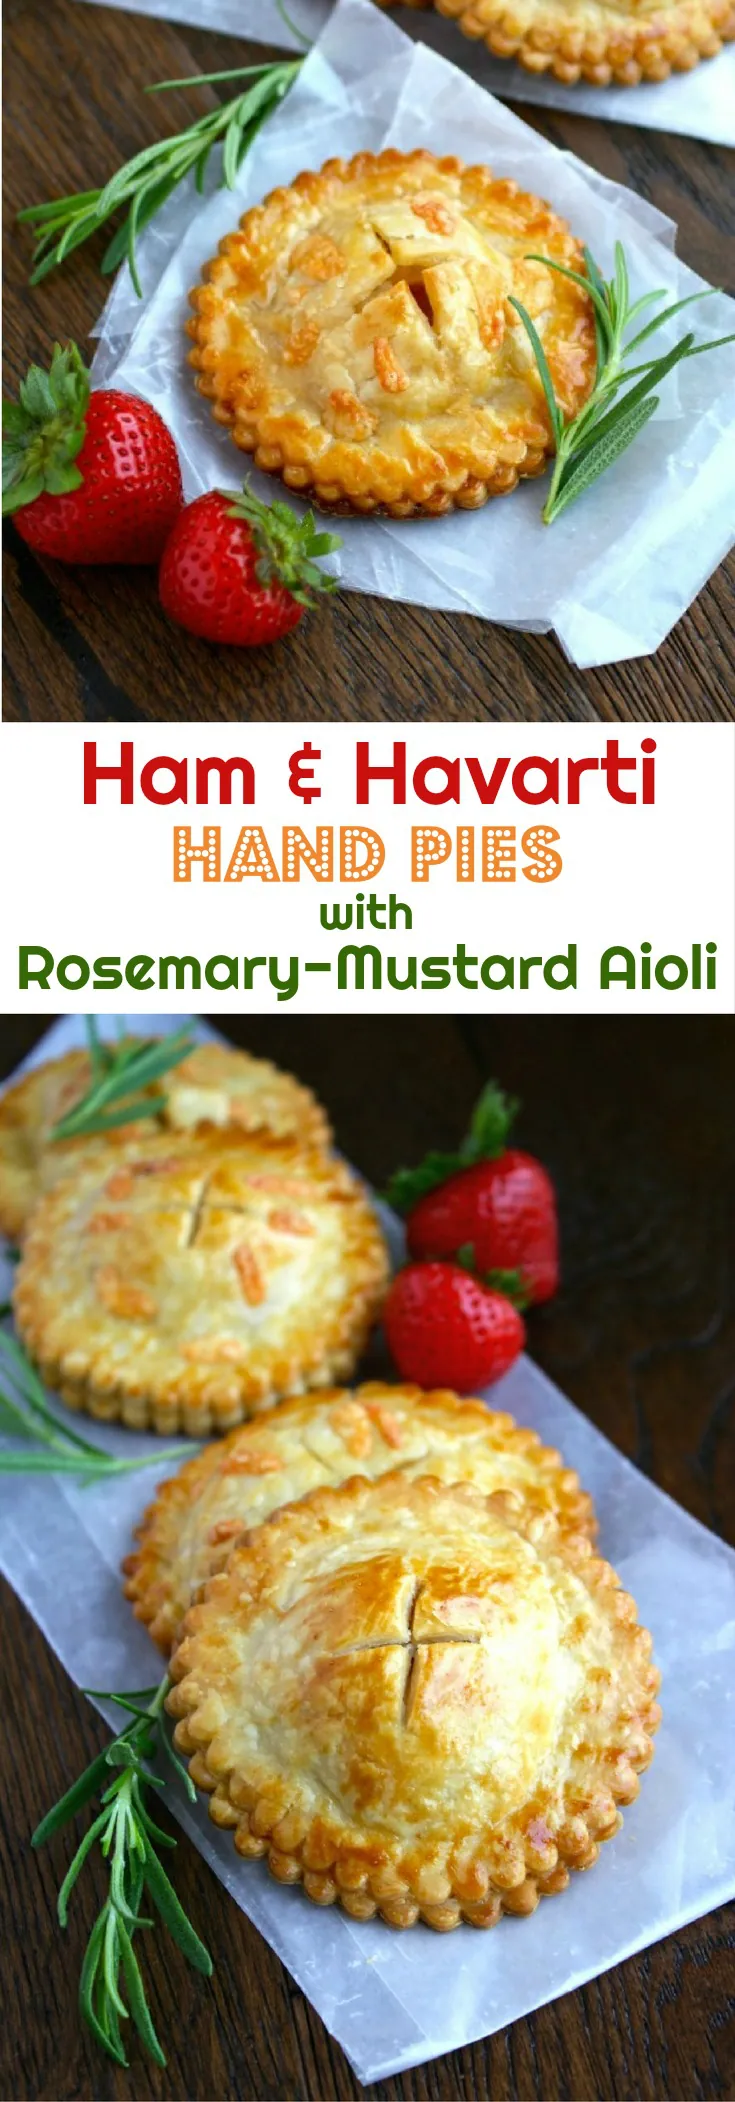 Ham & Havarti Hand Pies with Rosemary-Mustard Aioli are a fun twist on sandwiches. These hand pies make great snacks, too! 